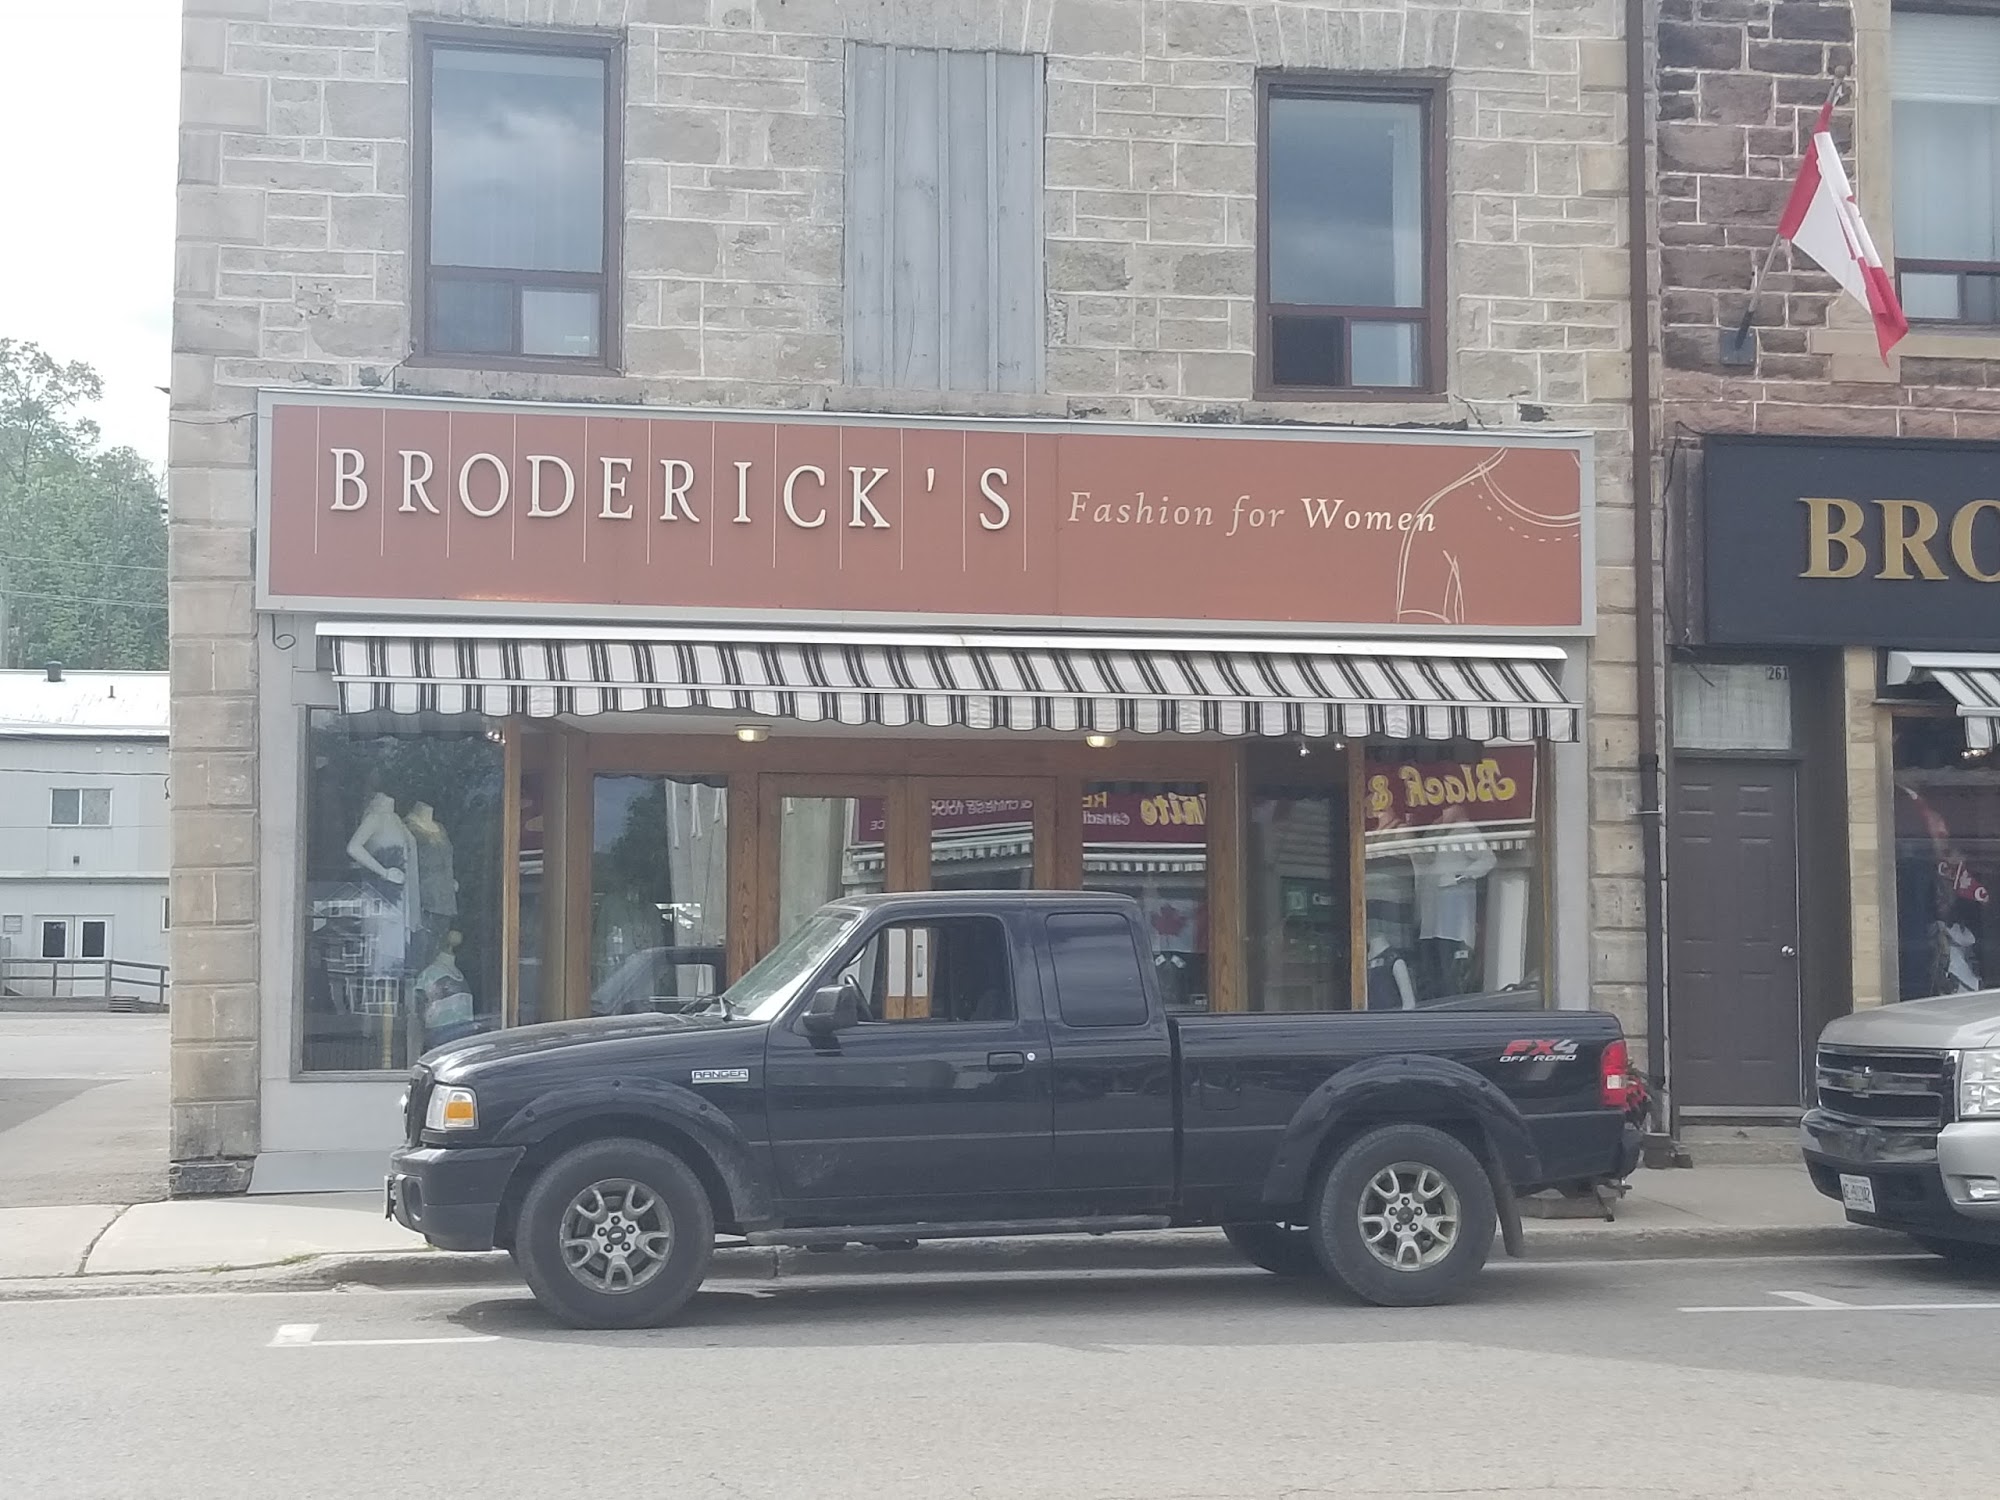 Broderick's Clothing Co.